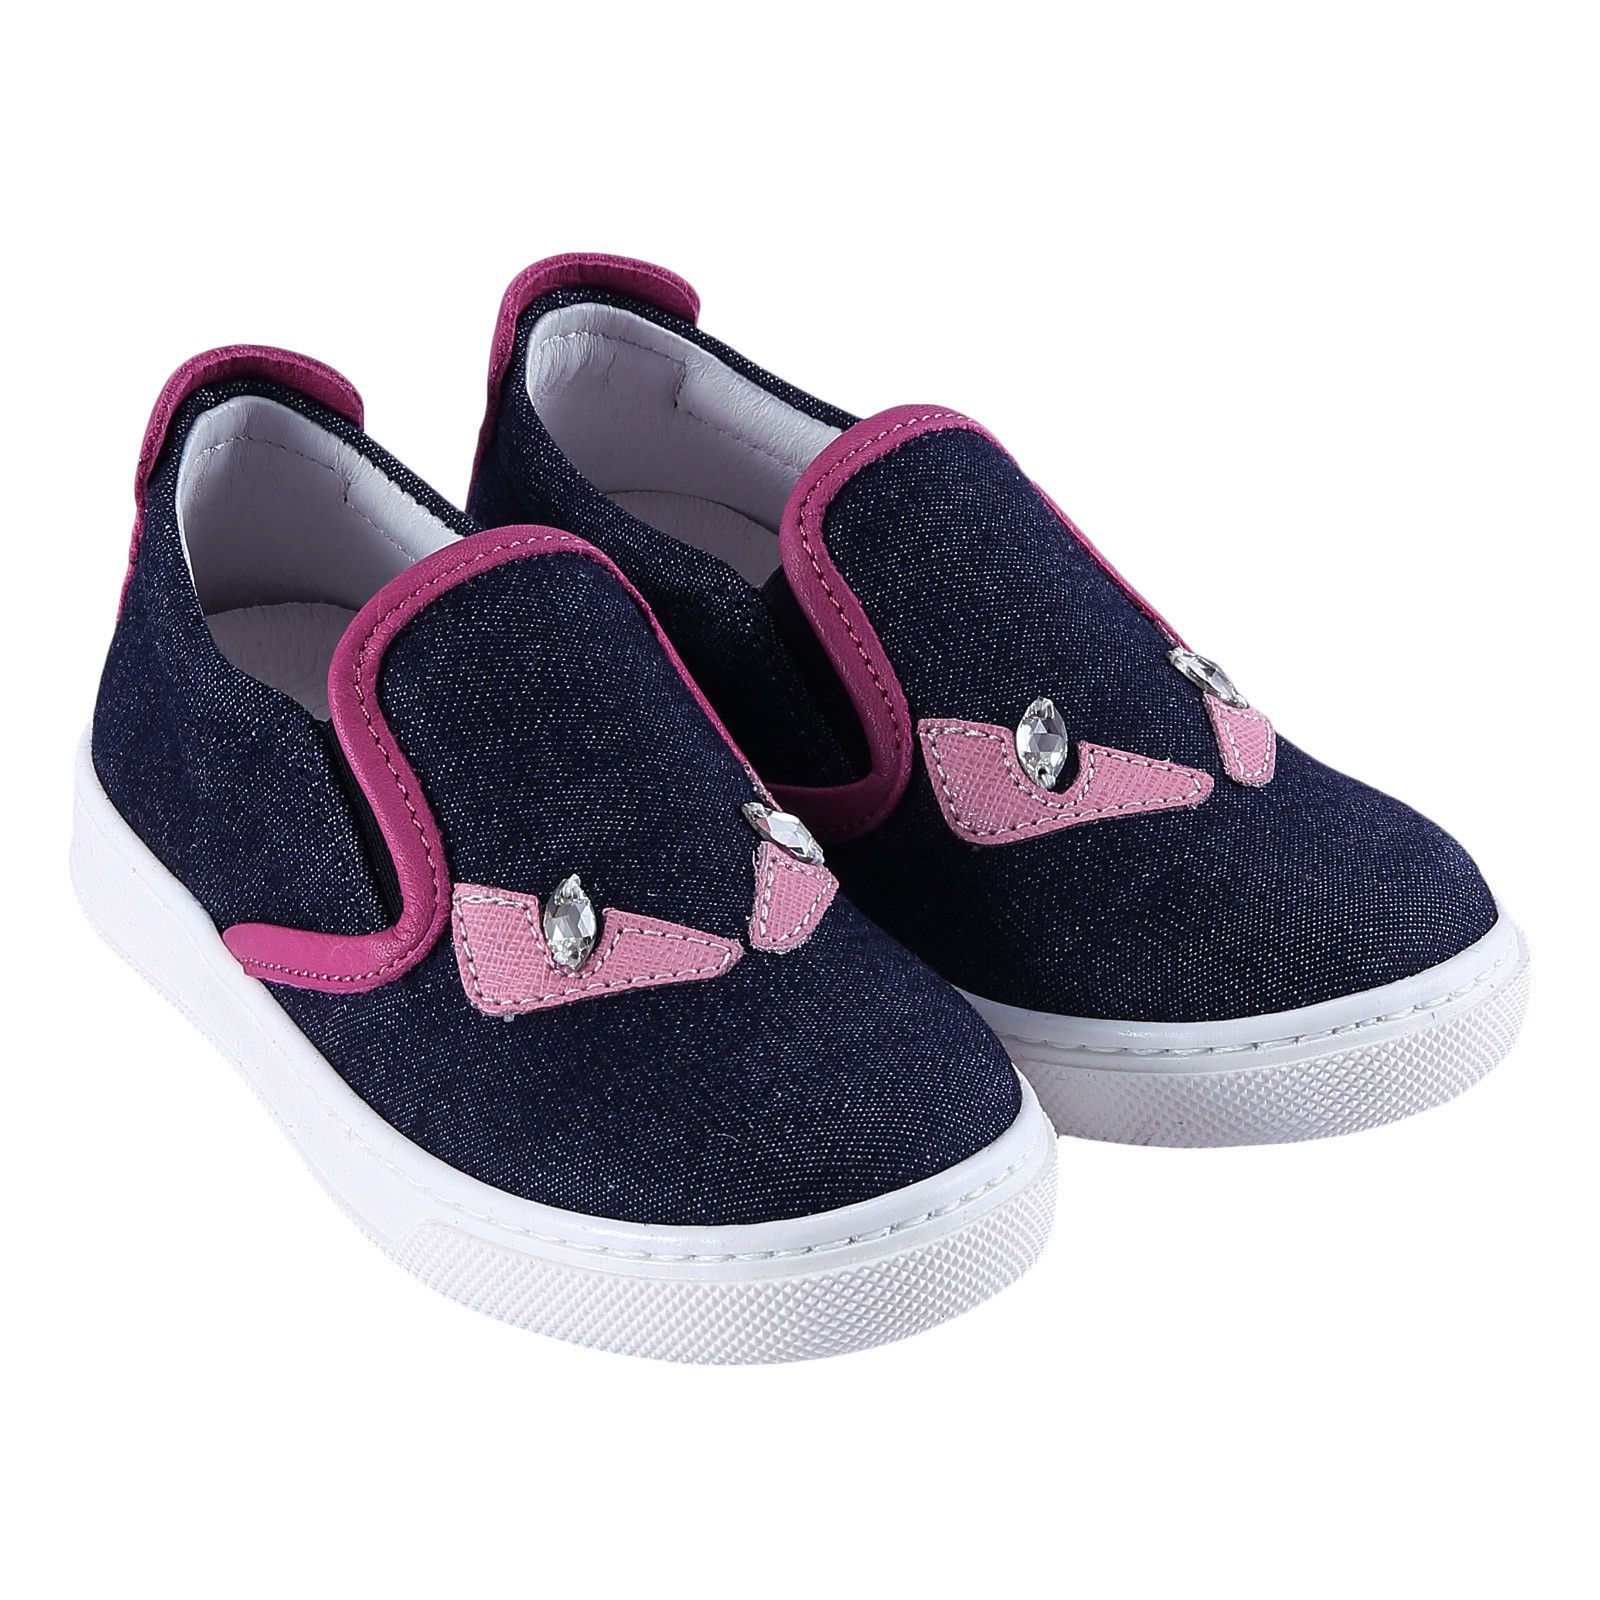 Girls Blue 'Monster' Surface Leather Trainers - CÉMAROSE | Children's Fashion Store - 1